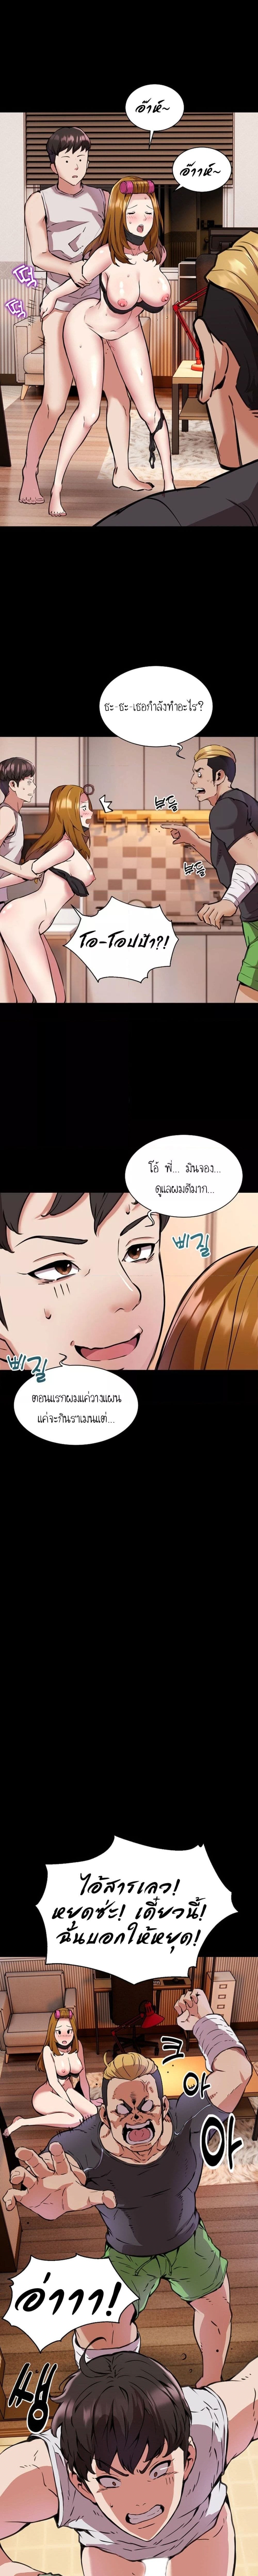 Driver in the New City ตอนที่ 1 ภาพ 10